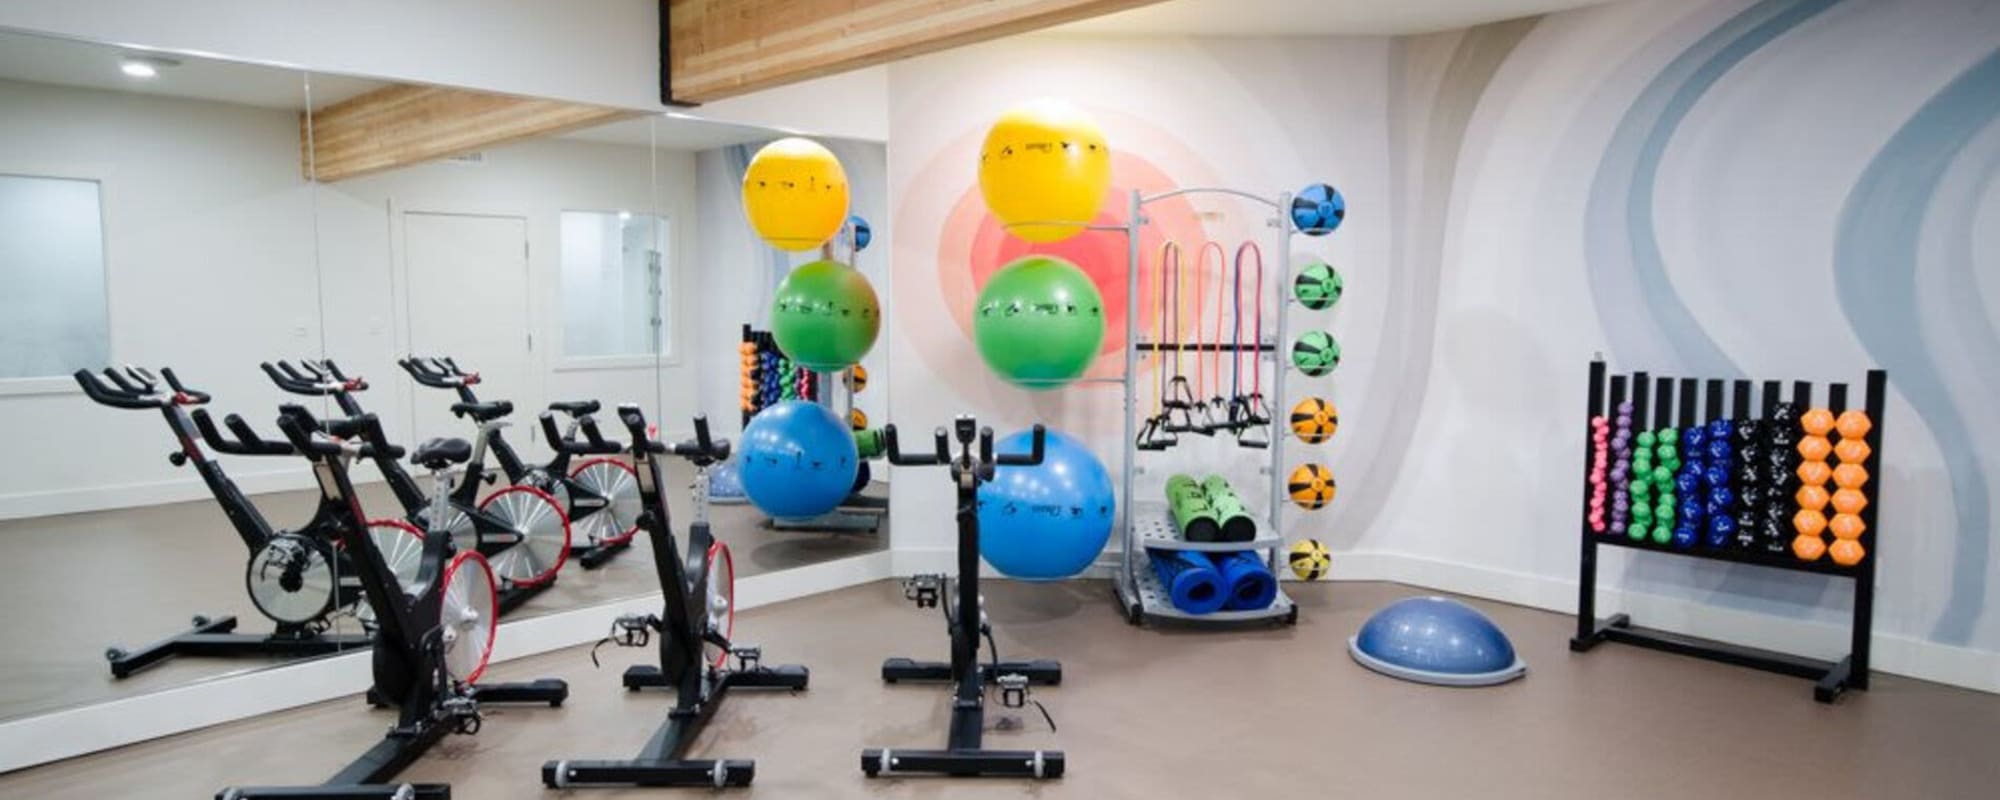 Fitness center with spin bikes at The Fairways in Tacoma, Washington